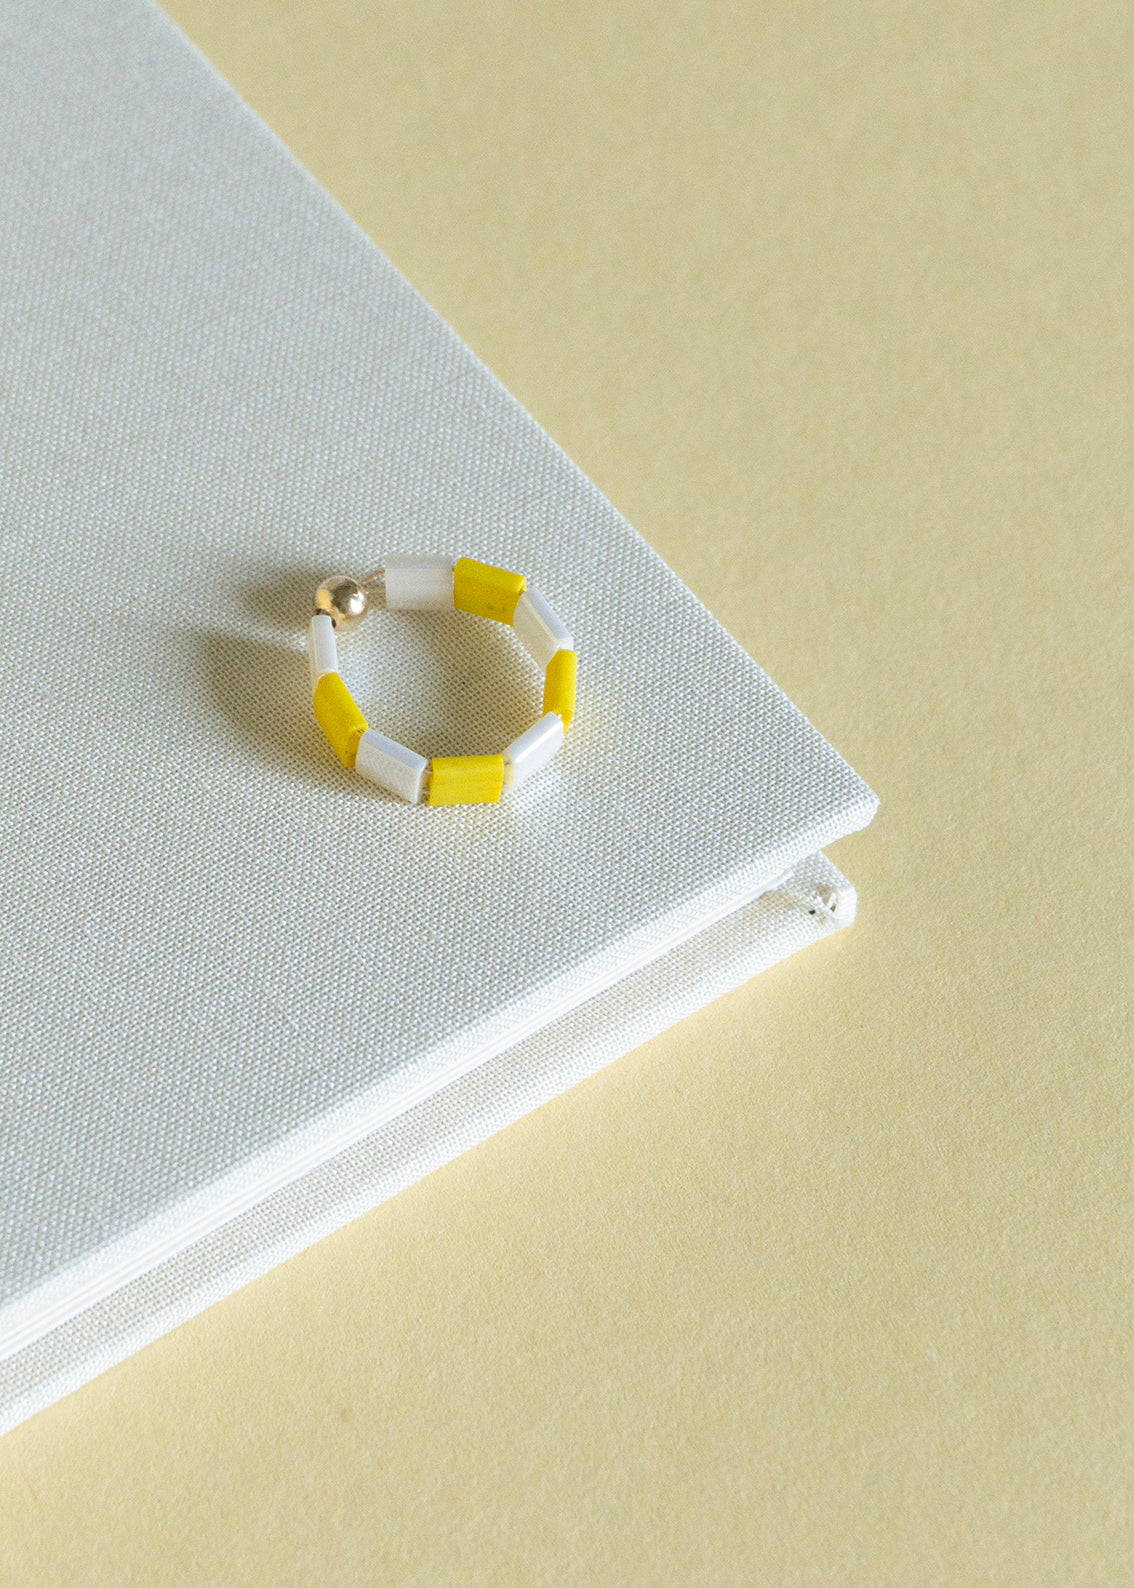 DOMINO ring made of glass beads - limoncello